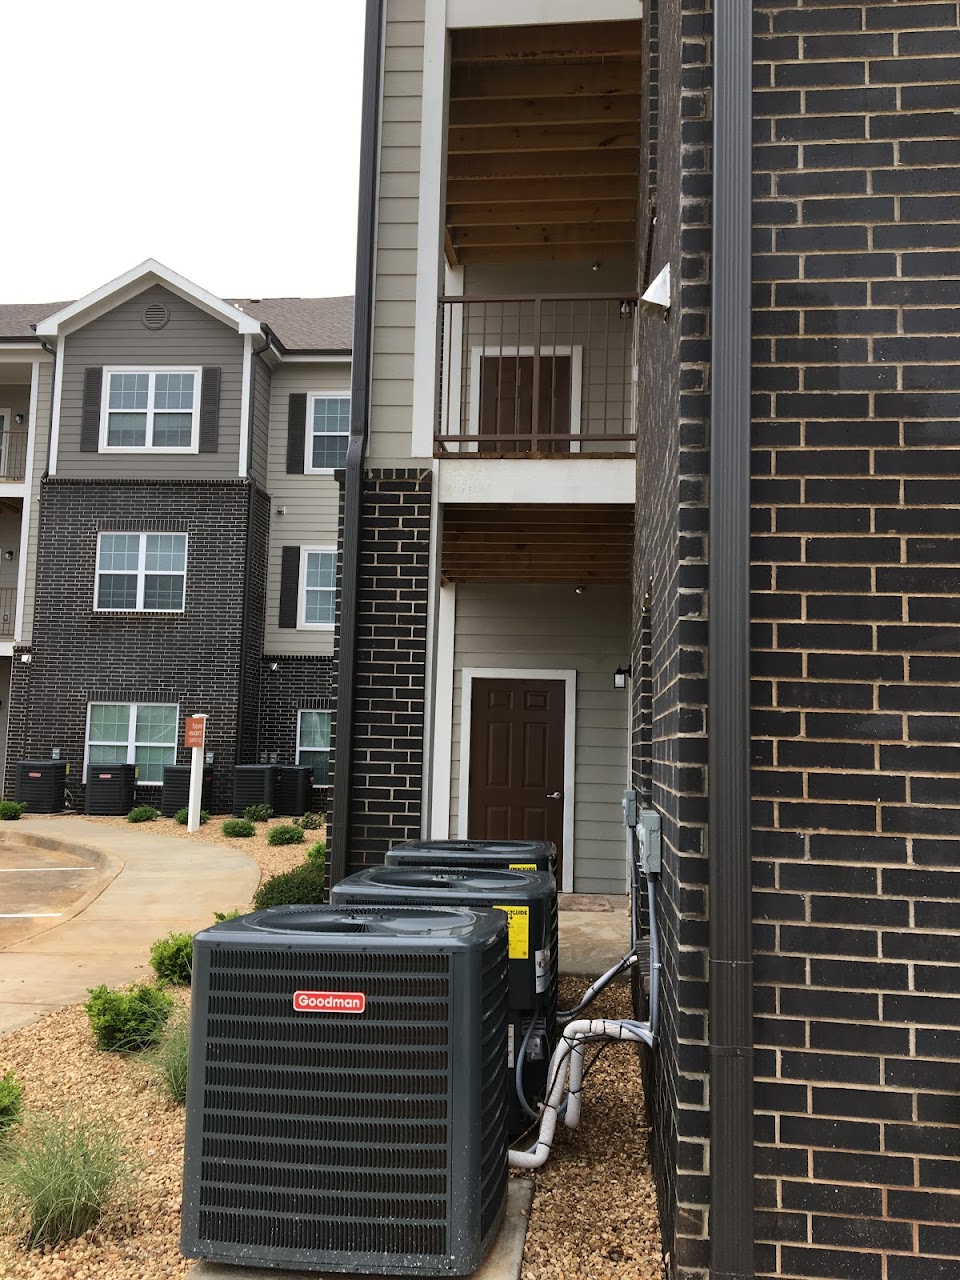 Photo of VILLAS AT LARK POINTE. Affordable housing located at 1220 EAST LARK STREET SPRINGFIELD, MO 65804